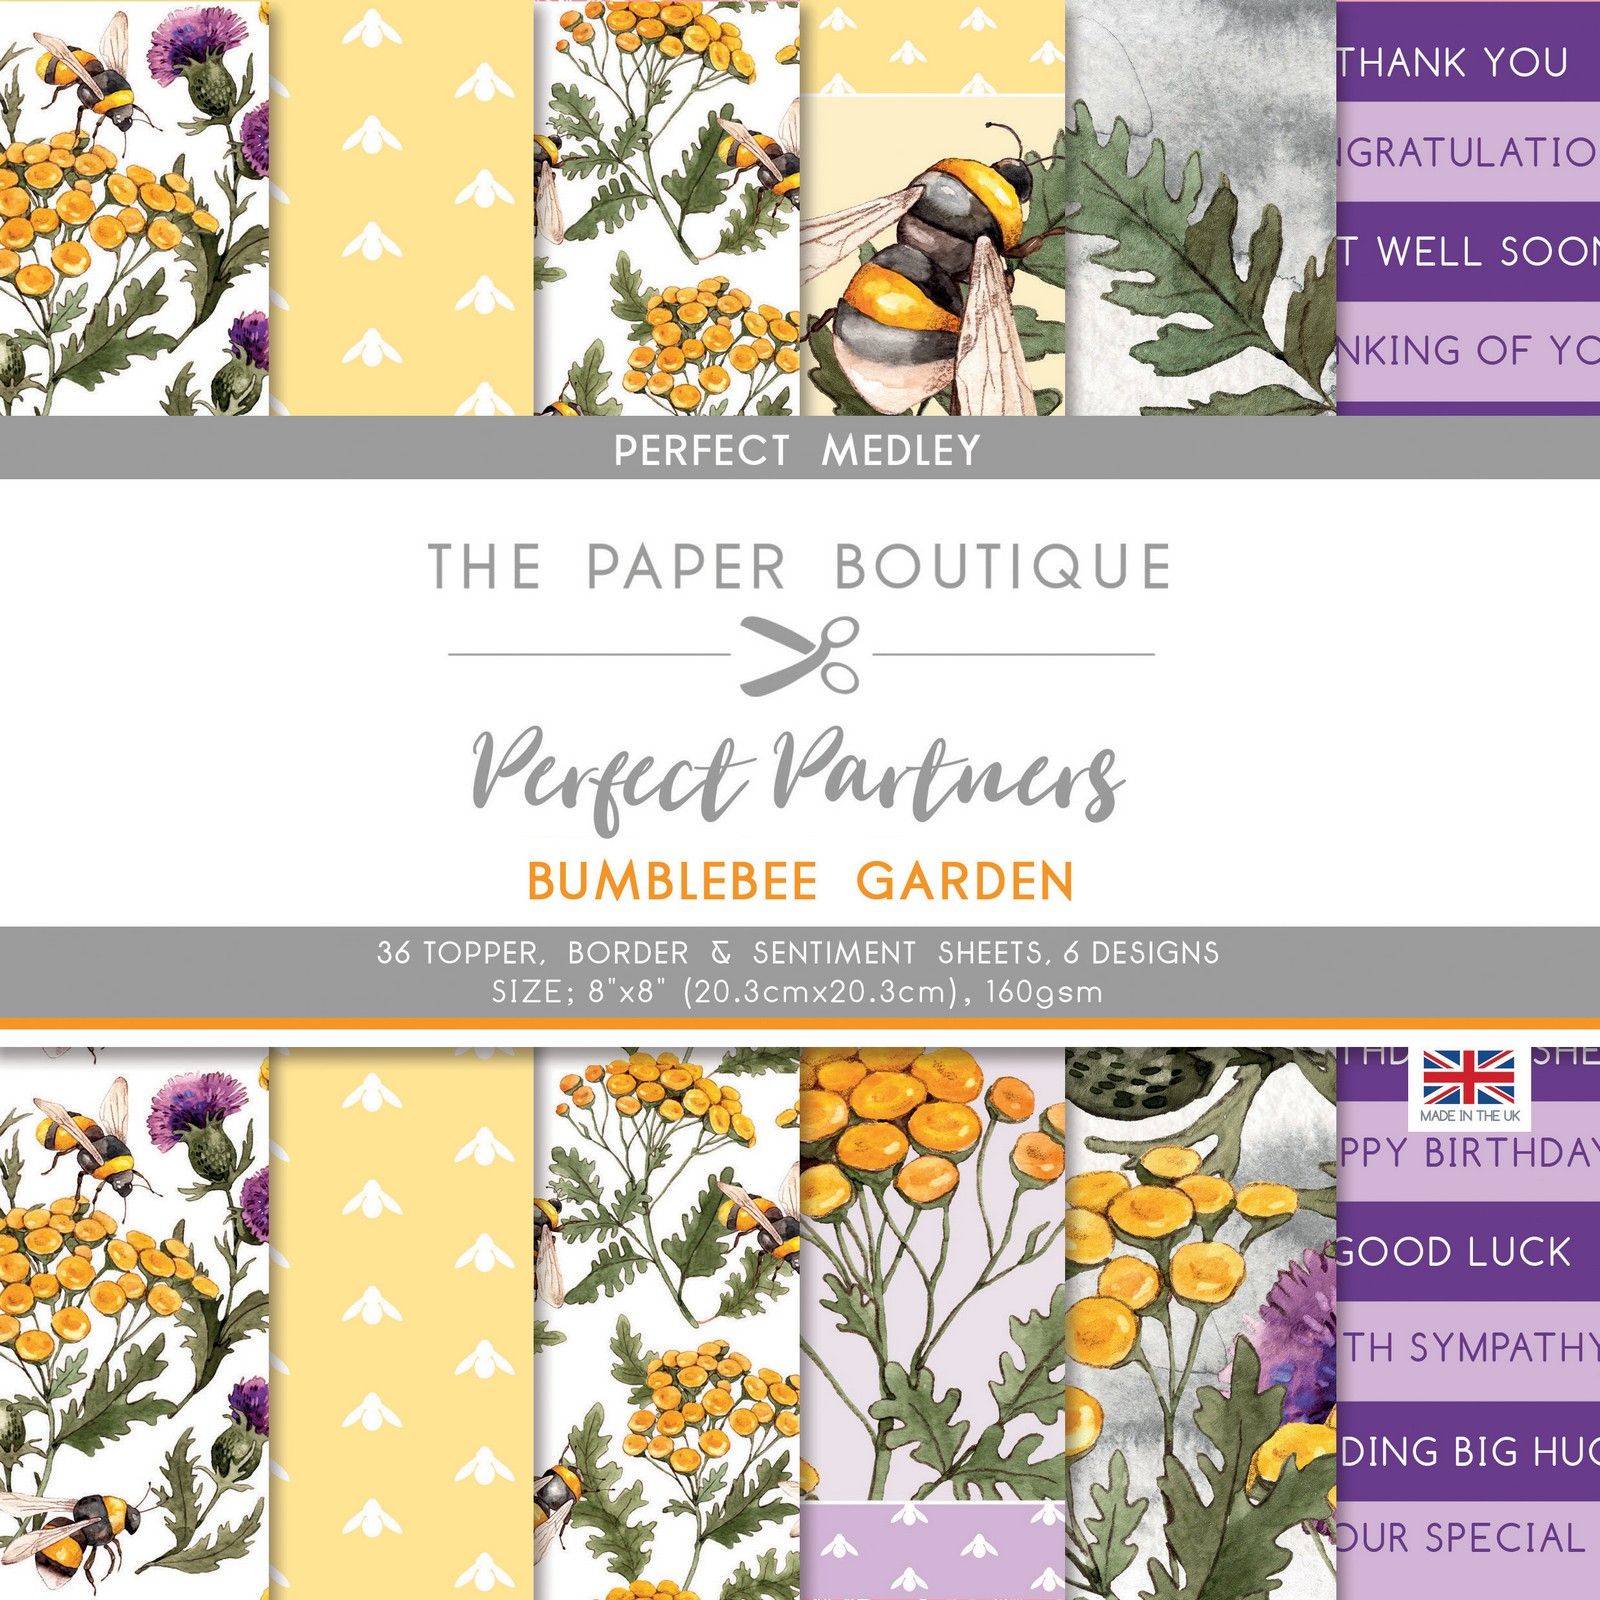 The Paper Boutique • Perfect partners Bumblebee garden perfect medley